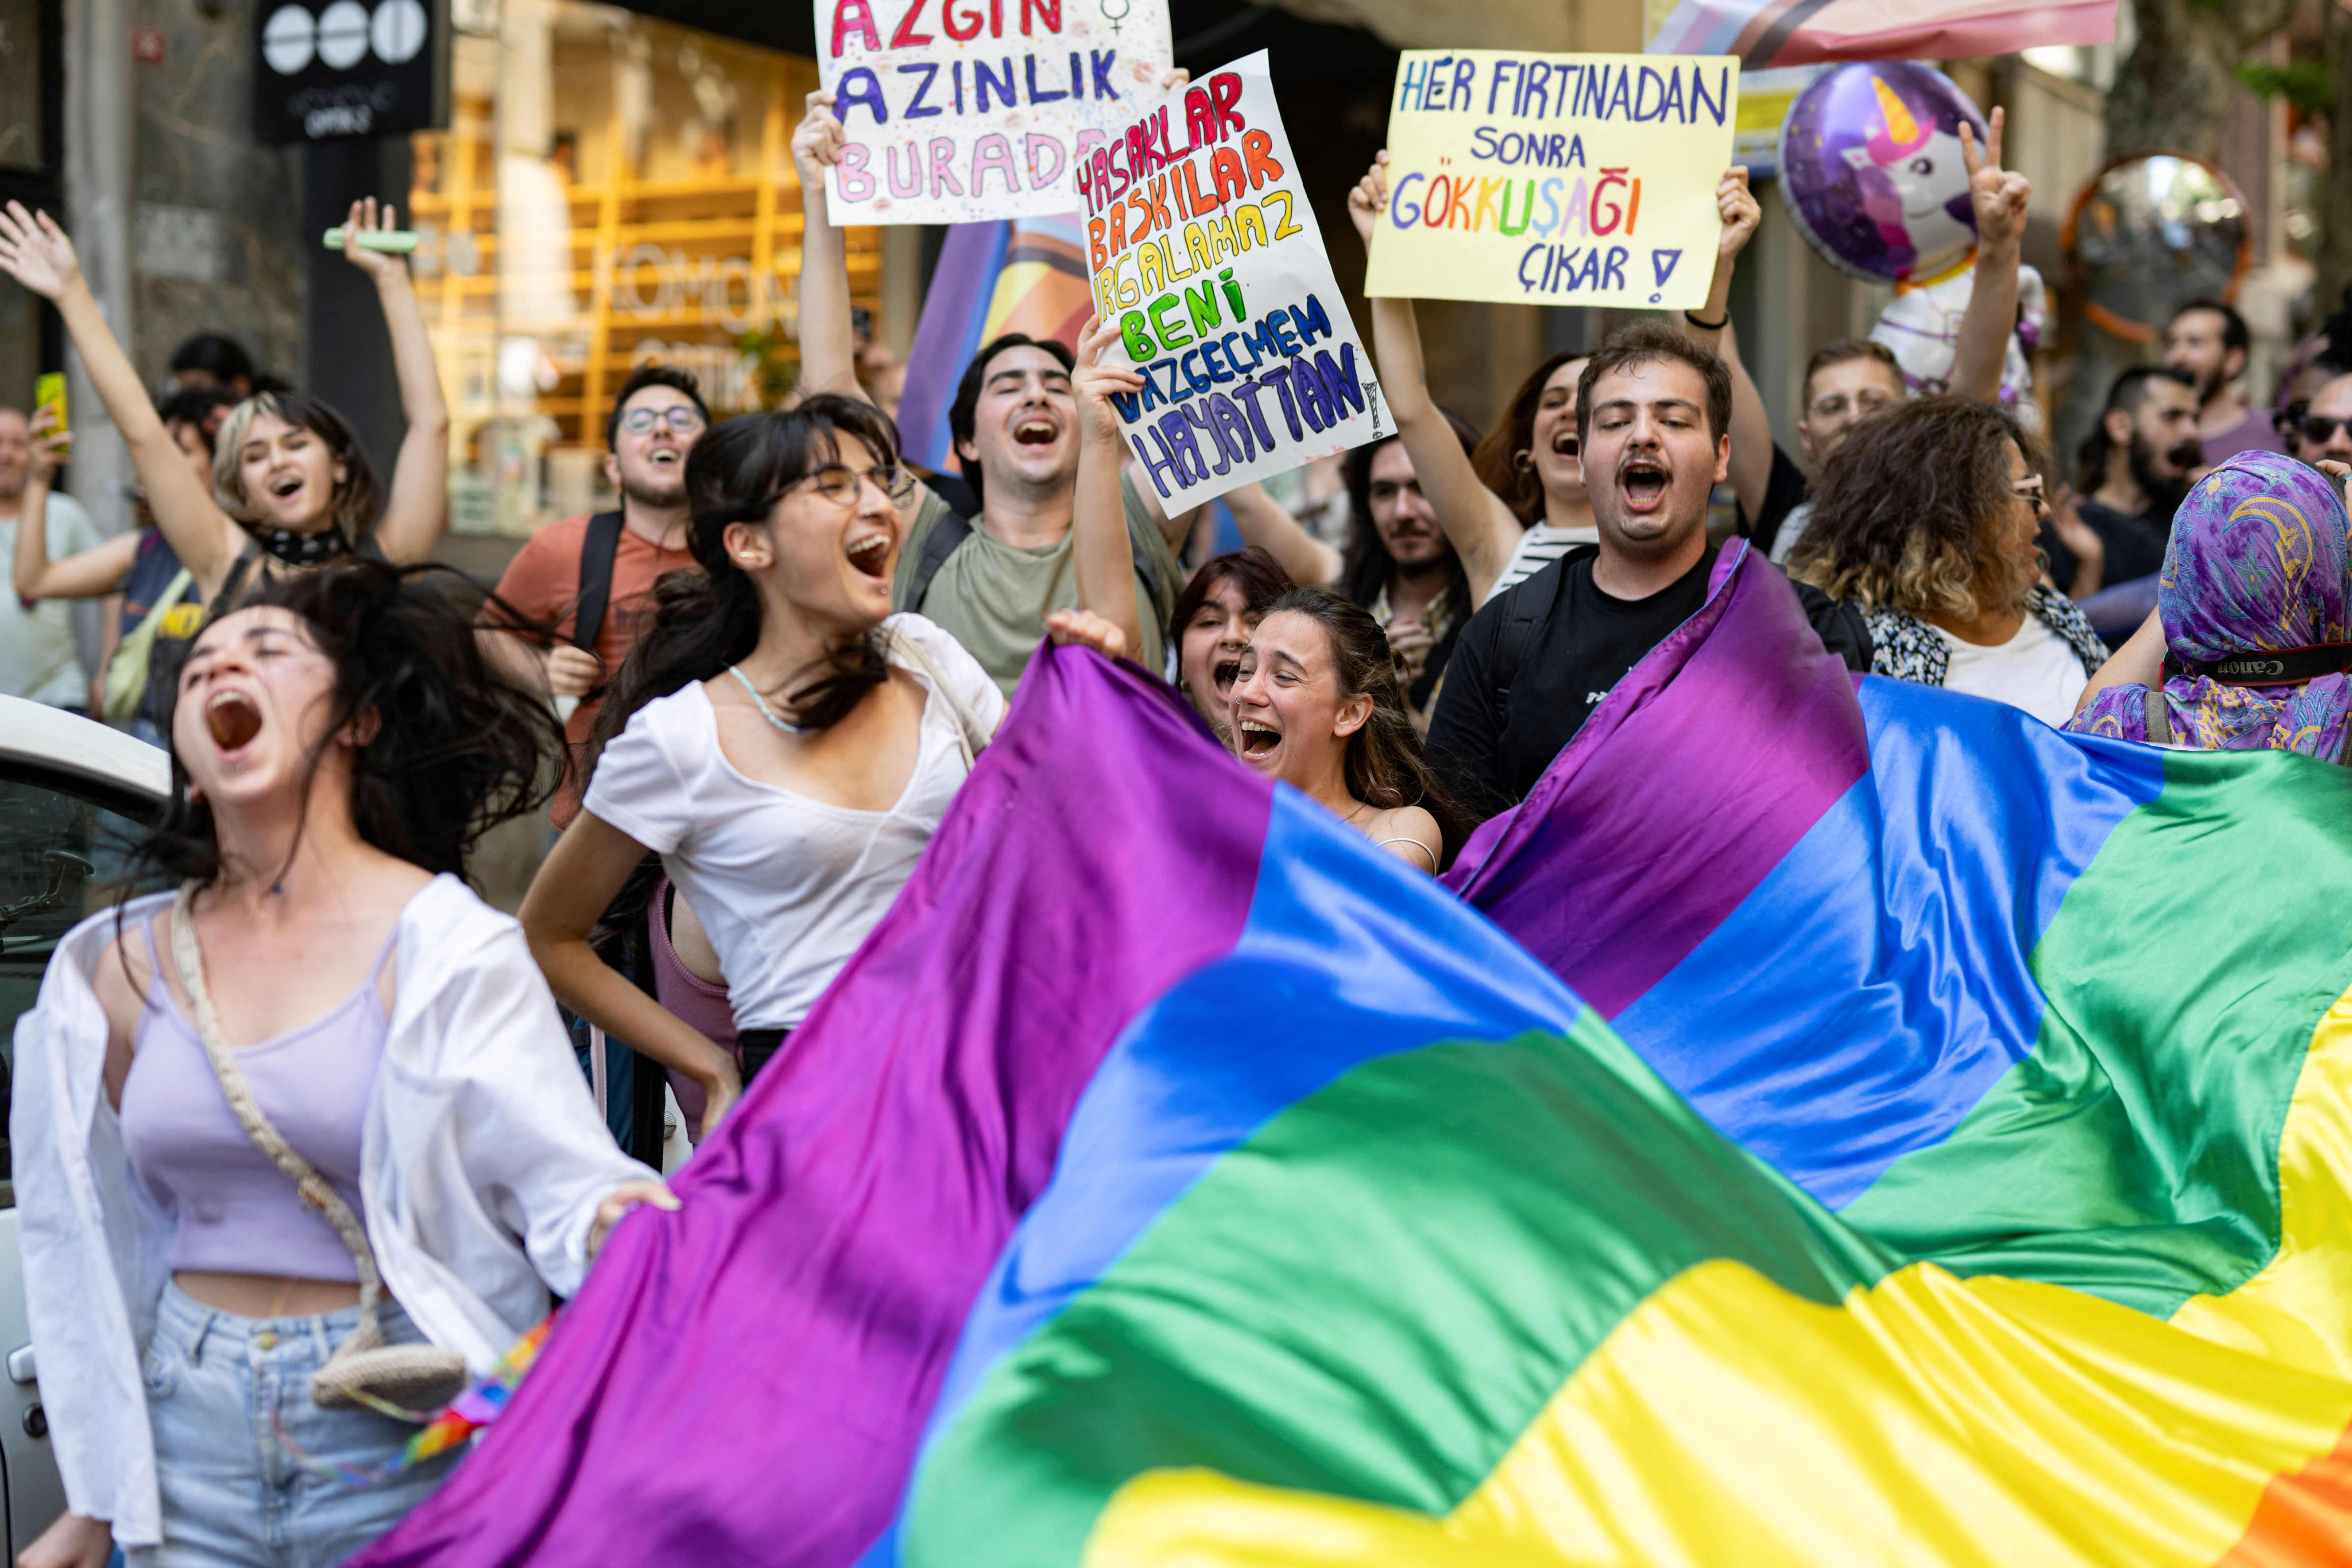 The unauthorised Pride march in Istanbul on Sunday before police swooped in to make arrests